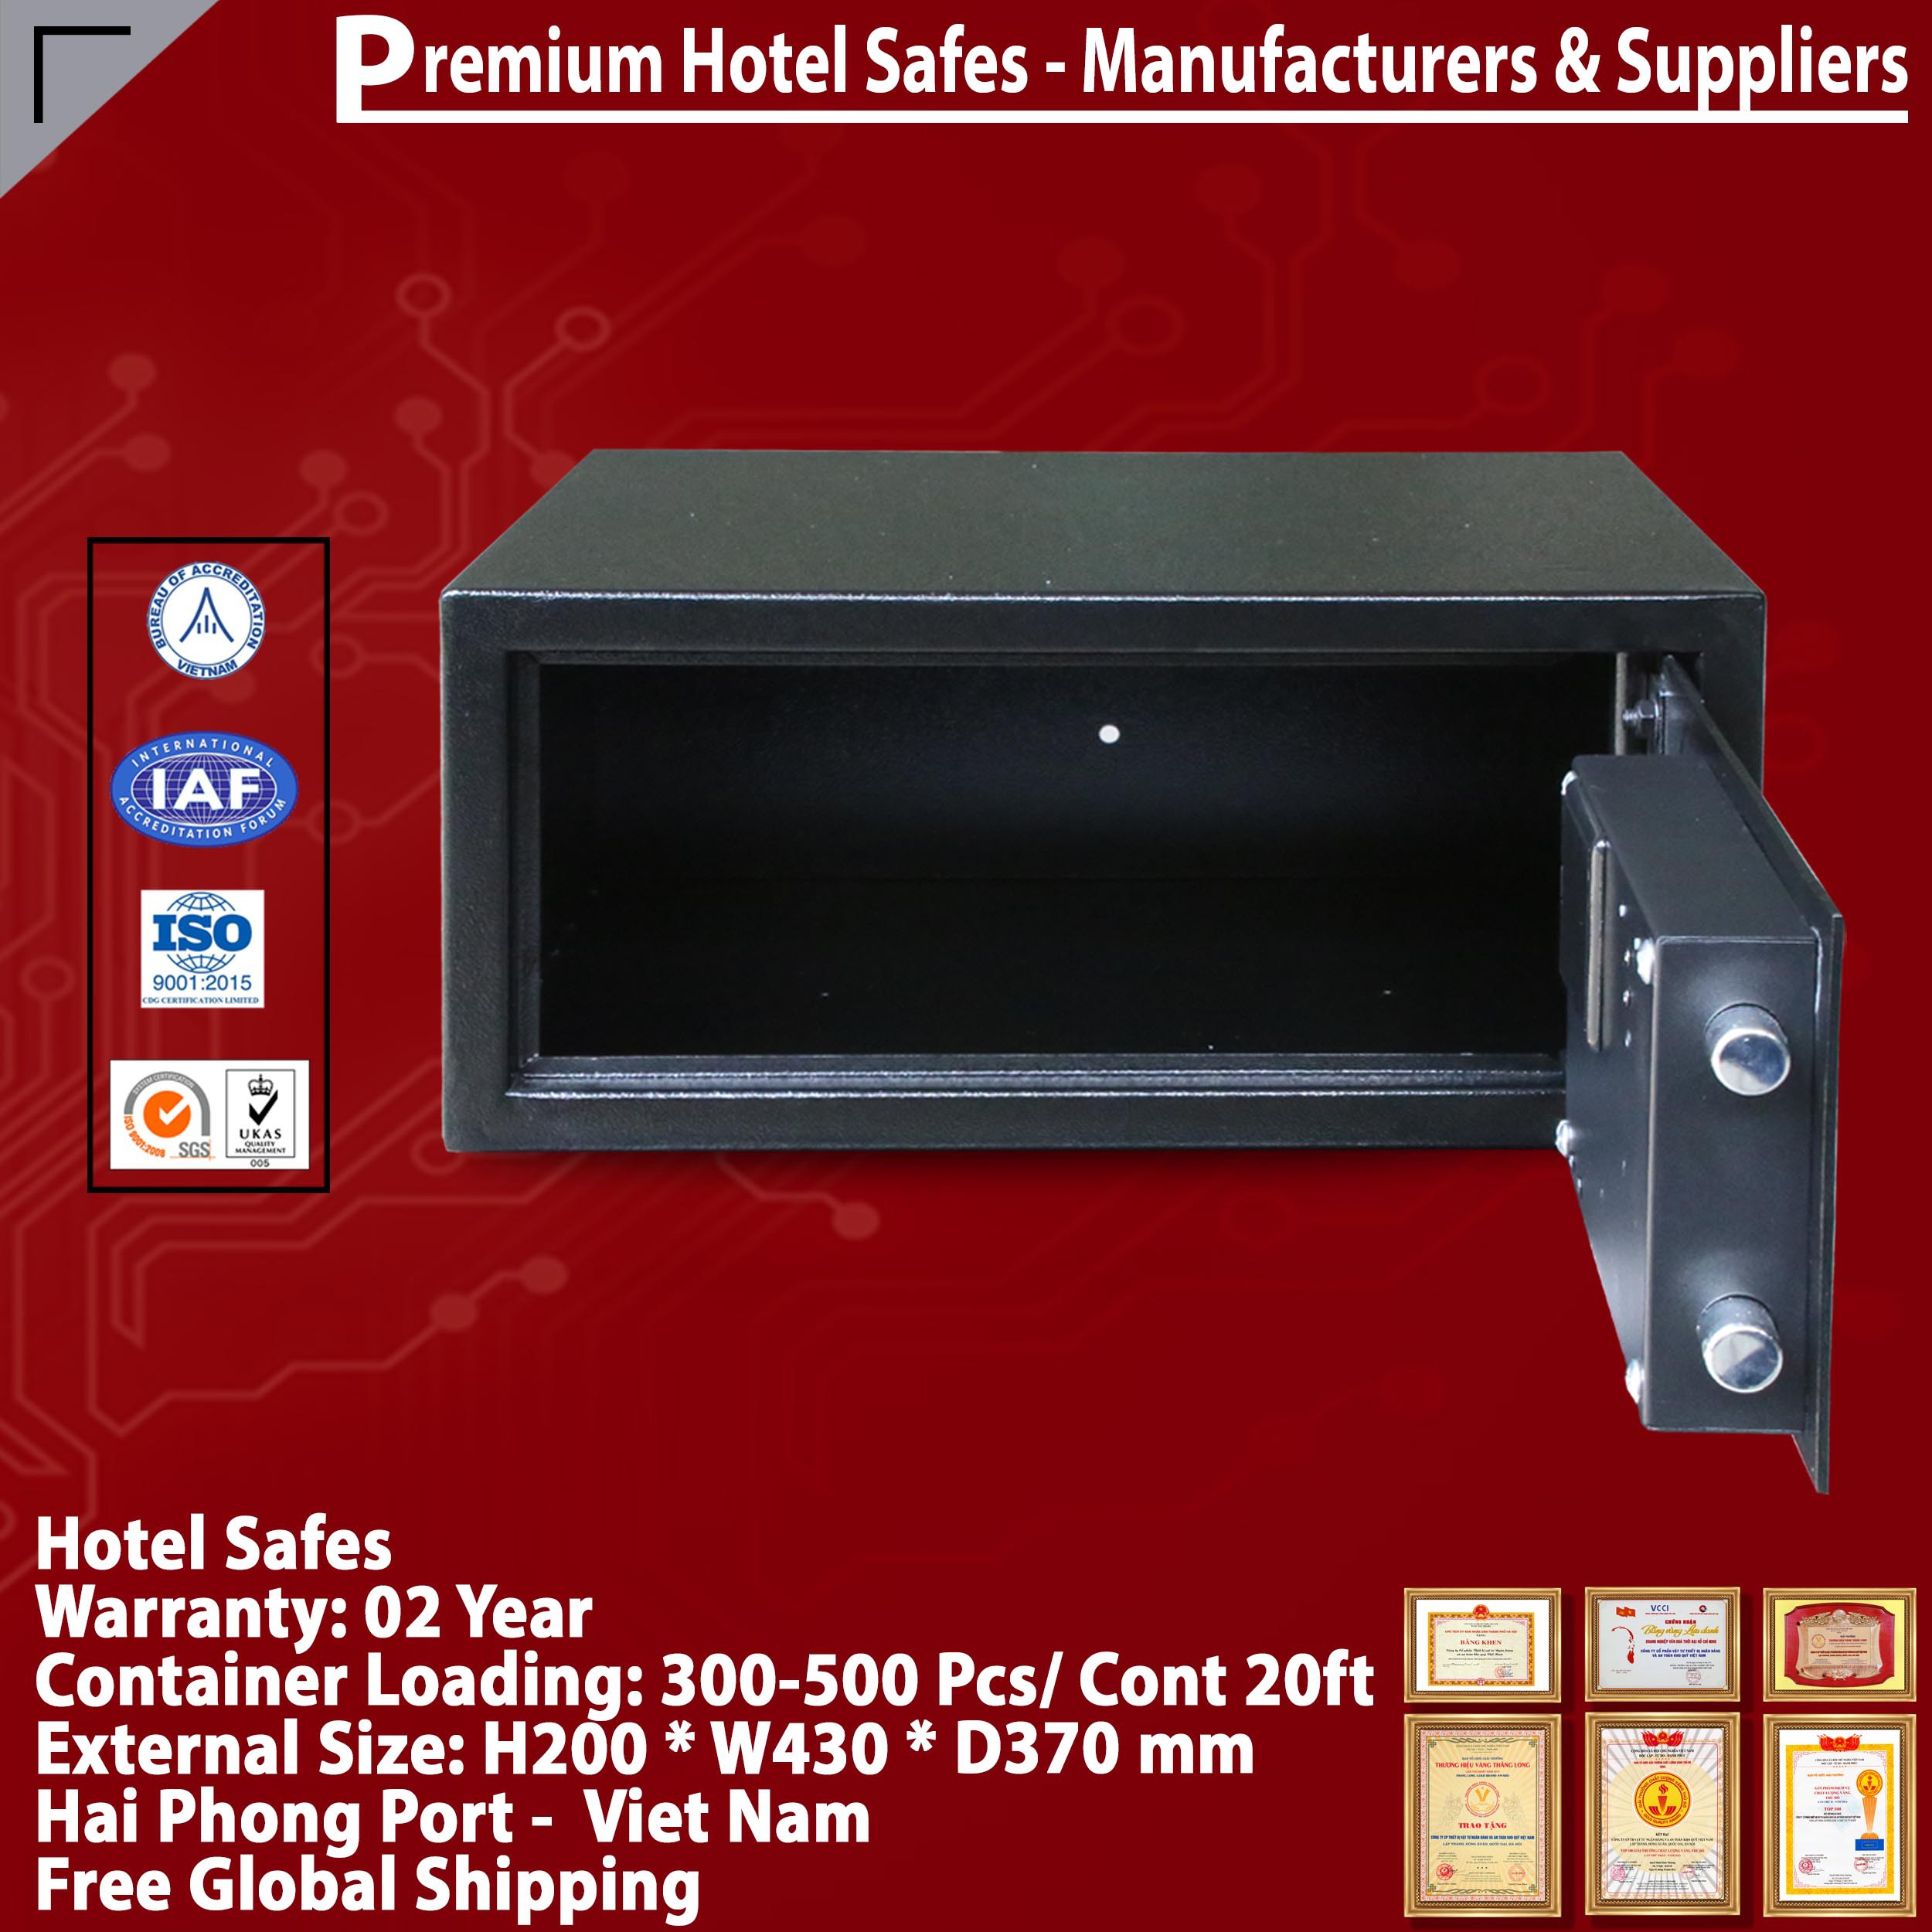 Best Sellers In Hotel Safes Made In Viet Nam Box